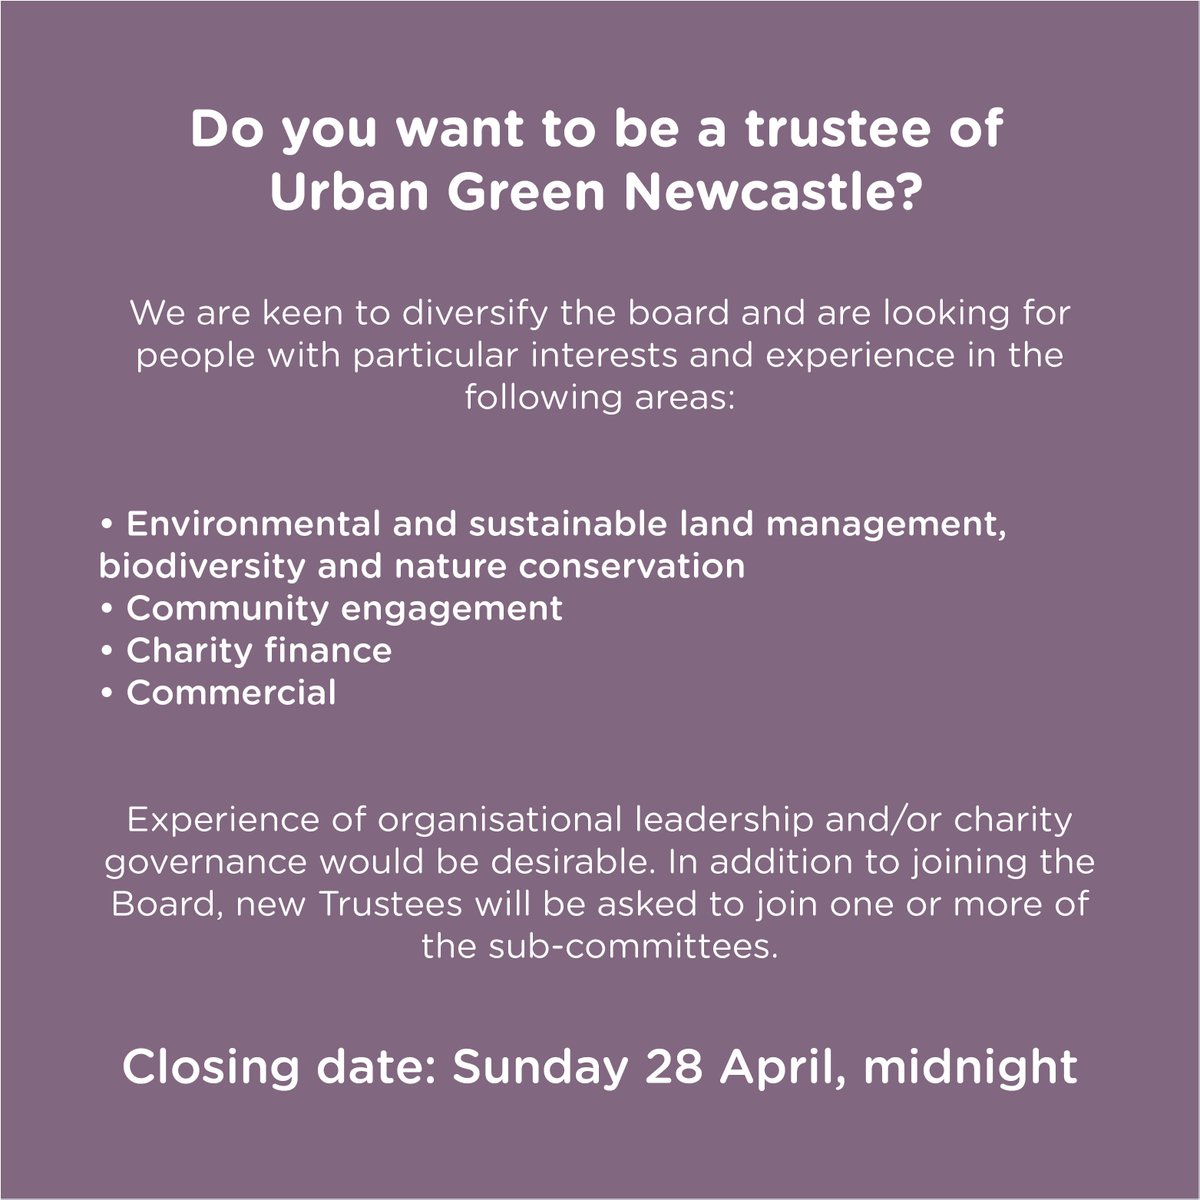 We're looking for three new trustees to join the board here at Urban Green Newcastle. Do you want to become part of an innovative movement to secure the future of parks, allotments and green spaces in Newcastle upon Tyne? Find out more and apply here: urbangreennewcastle.org/about-us/join-…